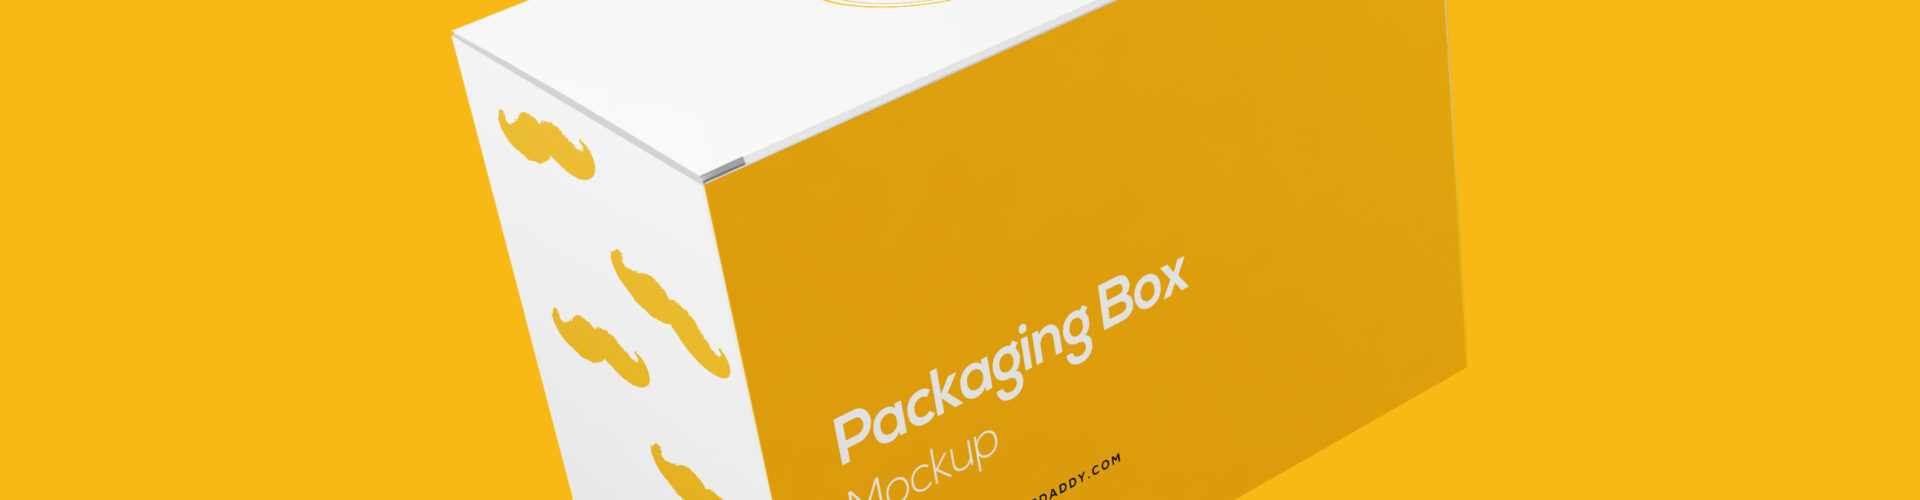 Rectangle Packaging Box Mockup Floating